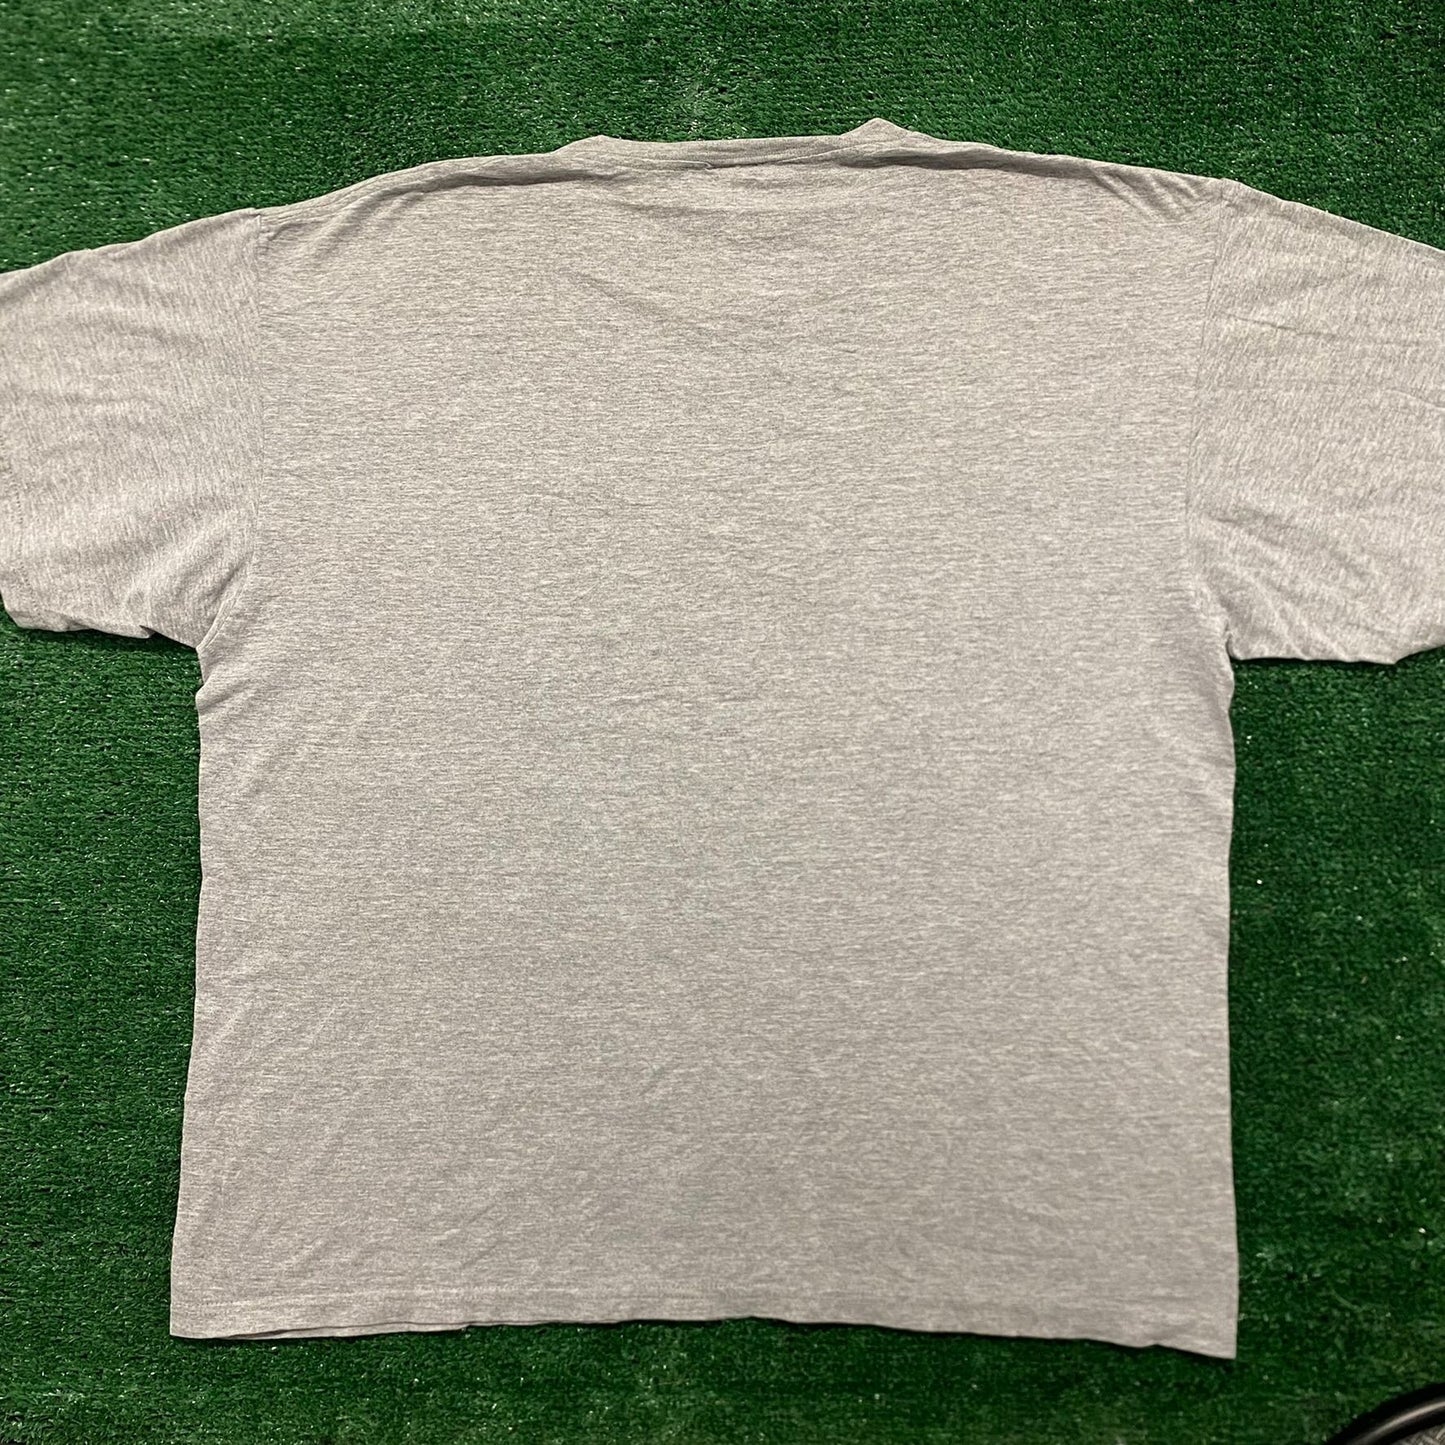 Vintage 90s Essential Baggy Nike Solo Swoosh T-Shirt